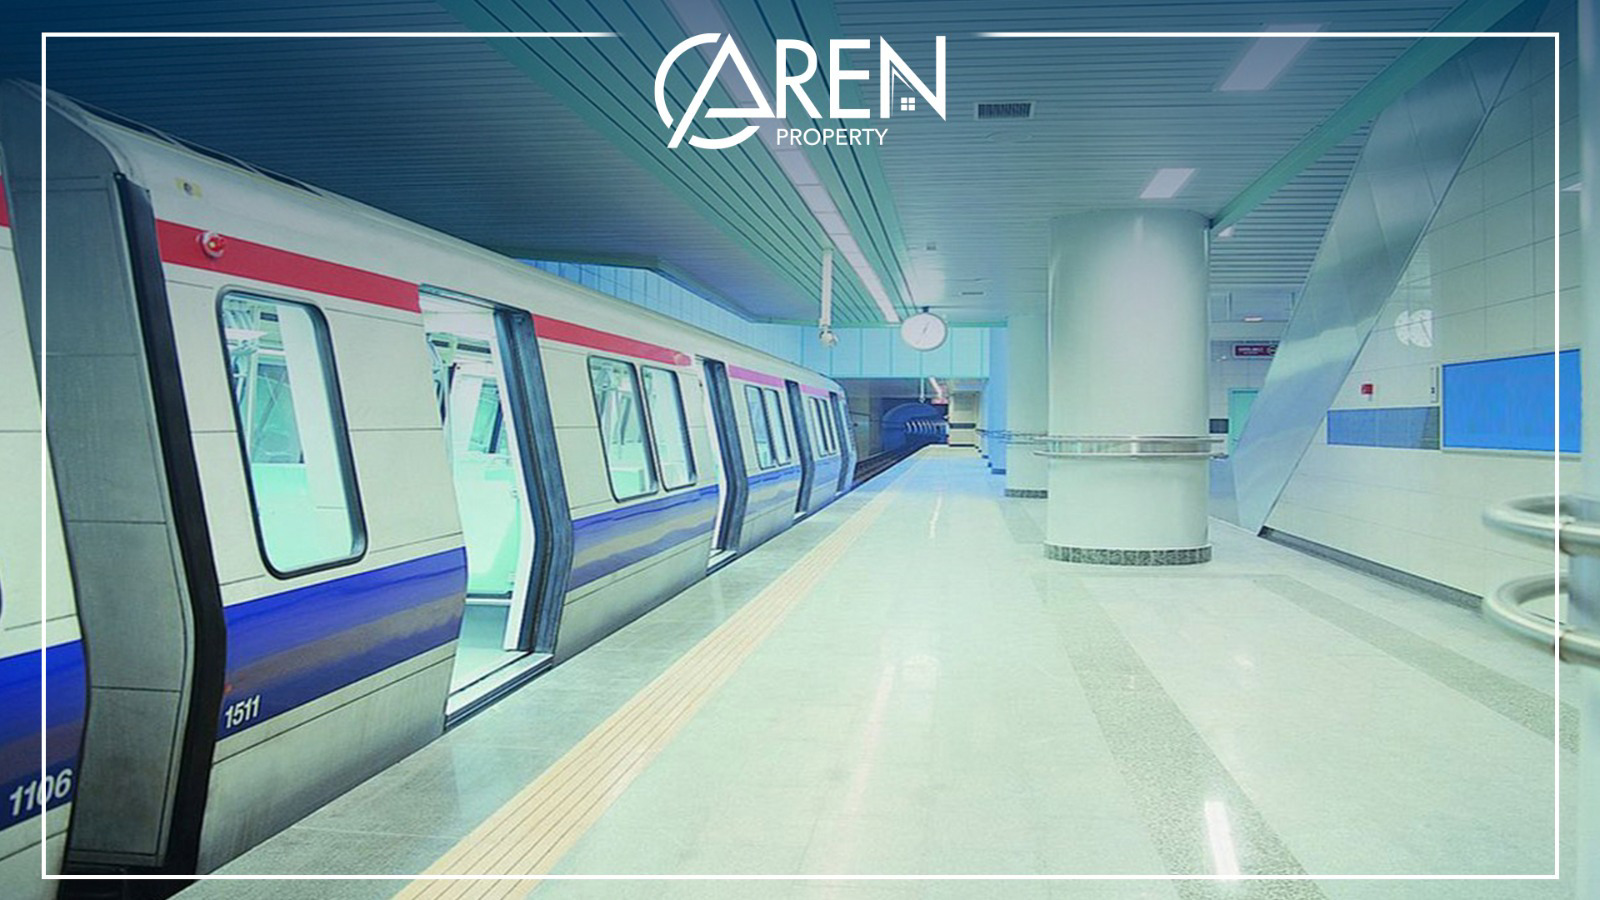 bahcesehir-real-estate-prices-rise-as-a-result-of-the-trial-opening-of-the-metro